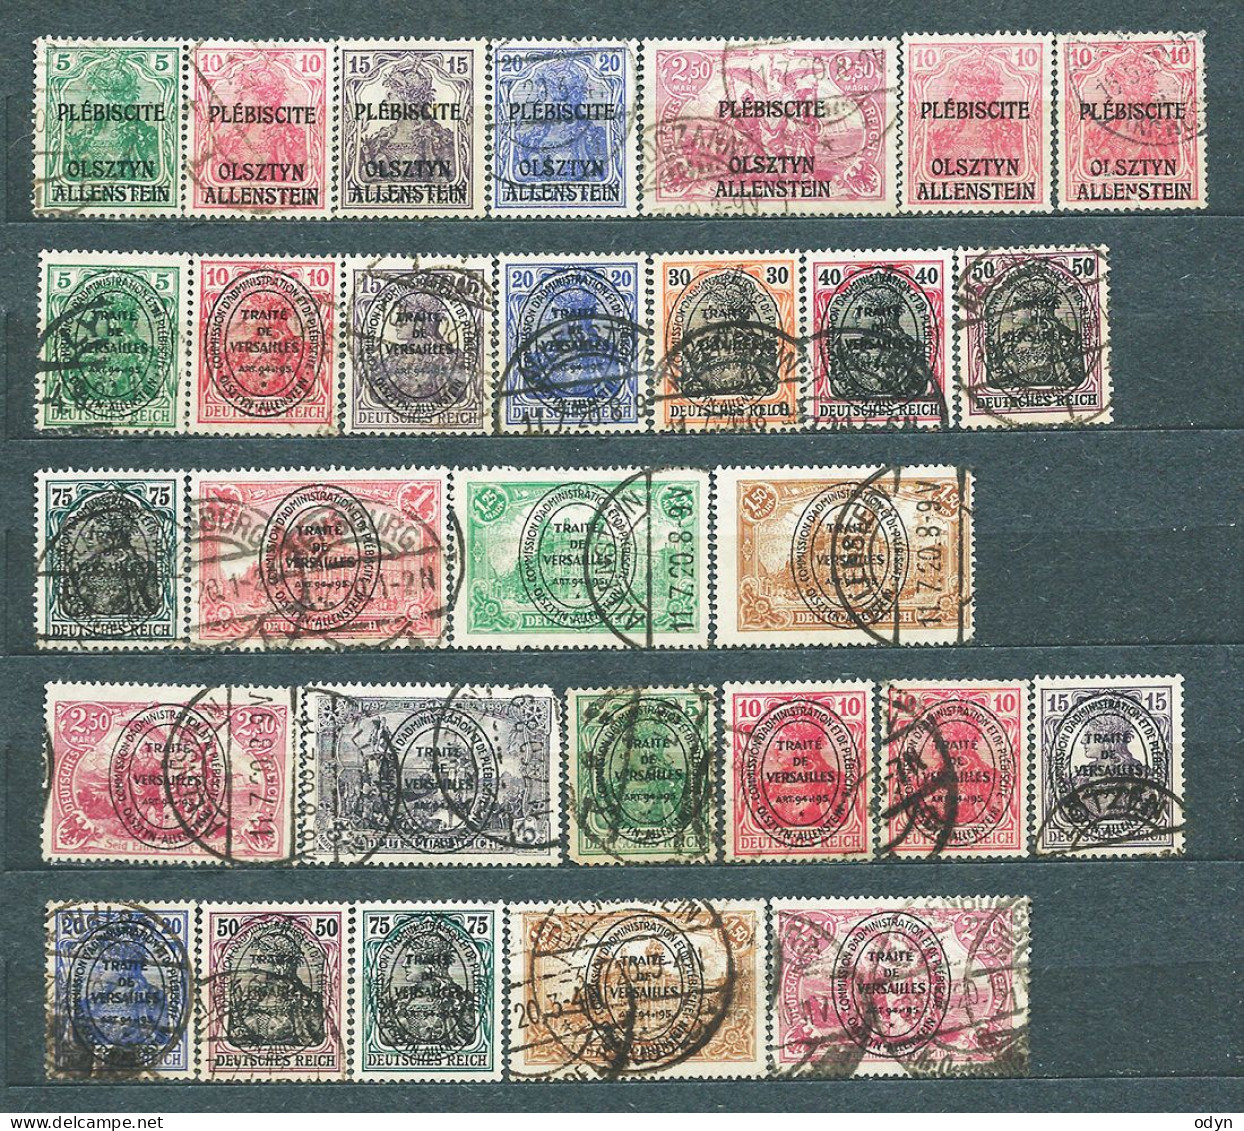 Plebiscite 1920, Allenstein, Lot Of 29 Stamps From Sets MiNr 1-14 And 15-28 - Used - Allenstein